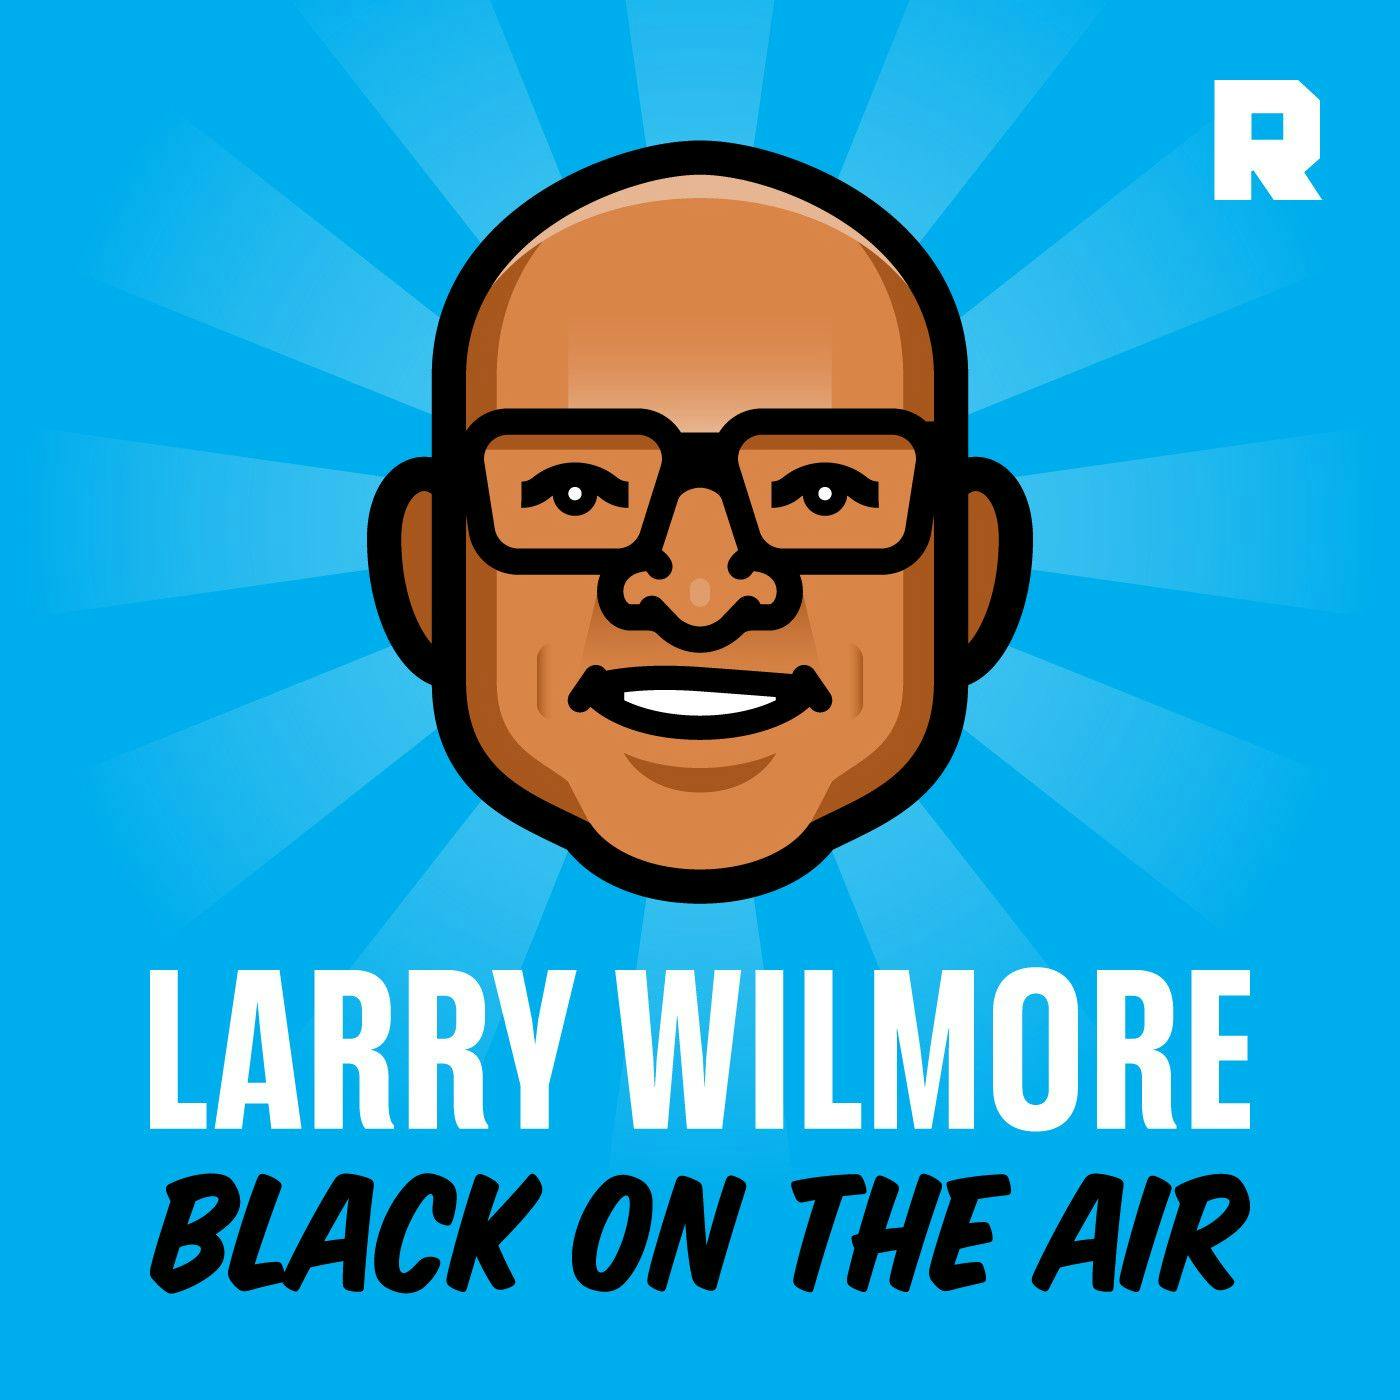 A Conversation About the Conservative Movement and Politics With Ben Shapiro | Larry Wilmore: Black on the Air